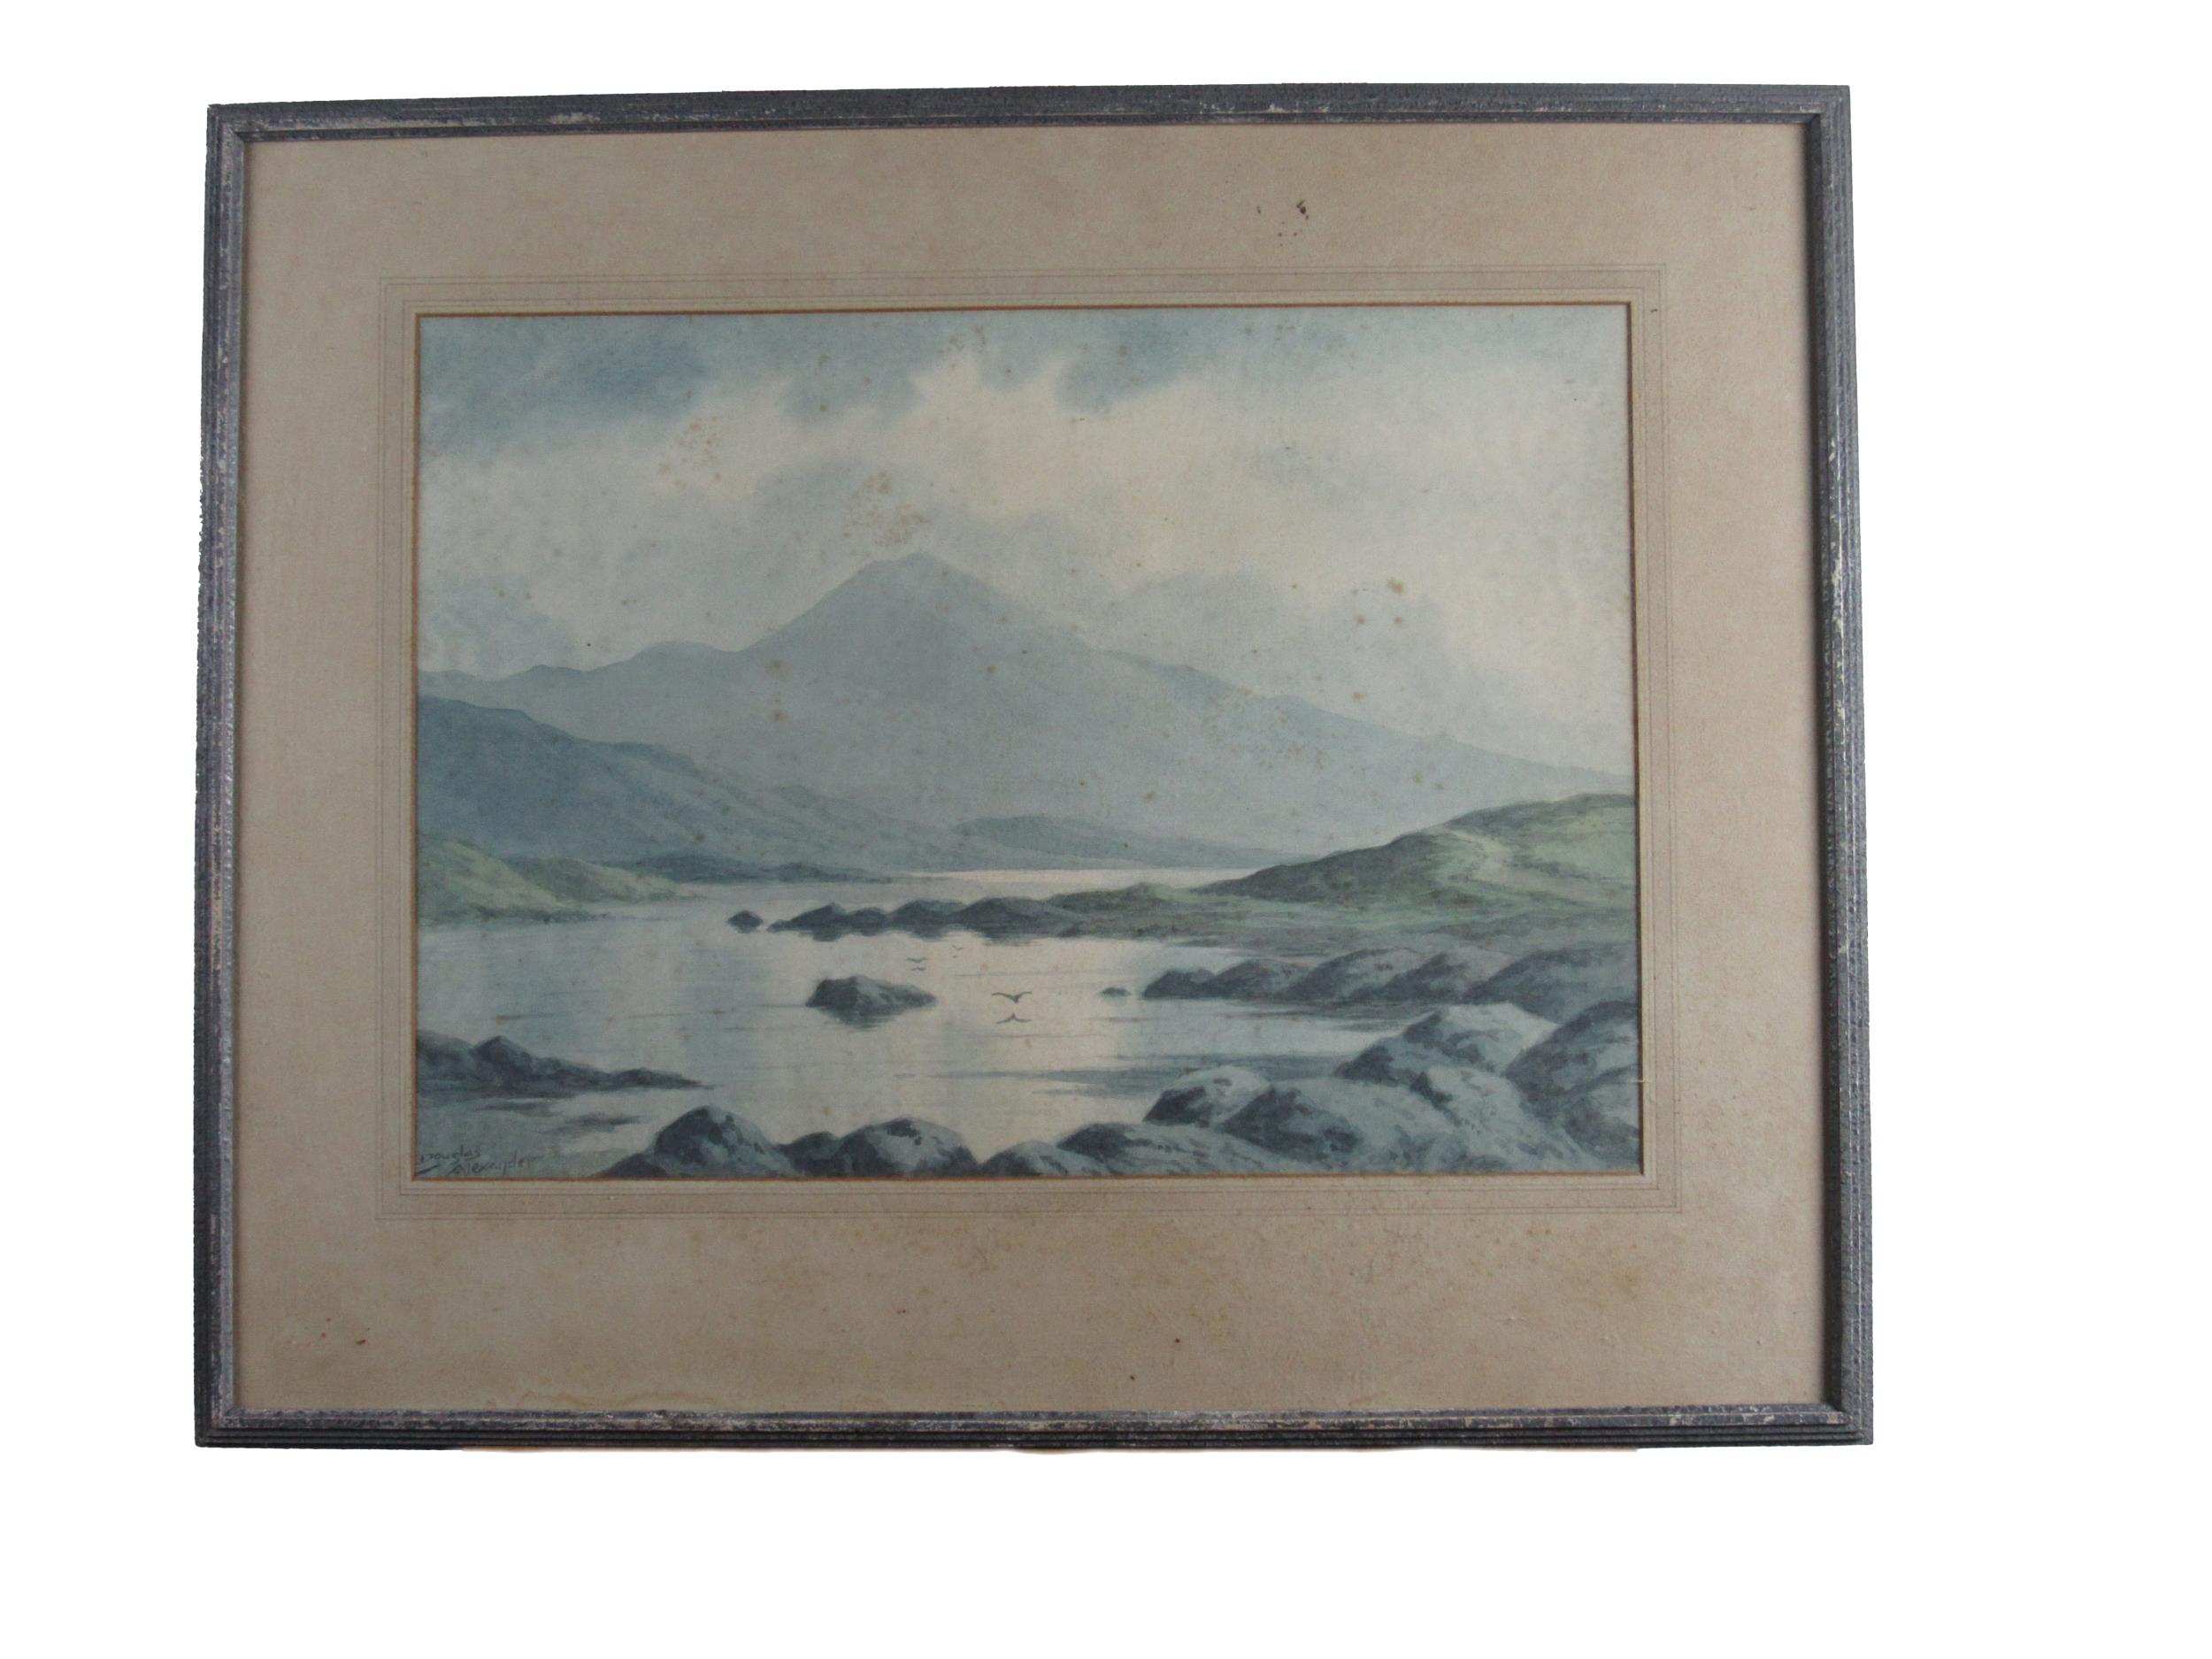 Douglas Alexander, RHA (1871-1945) "On Lough Conn," and "Early Morning near Waterville, Co.